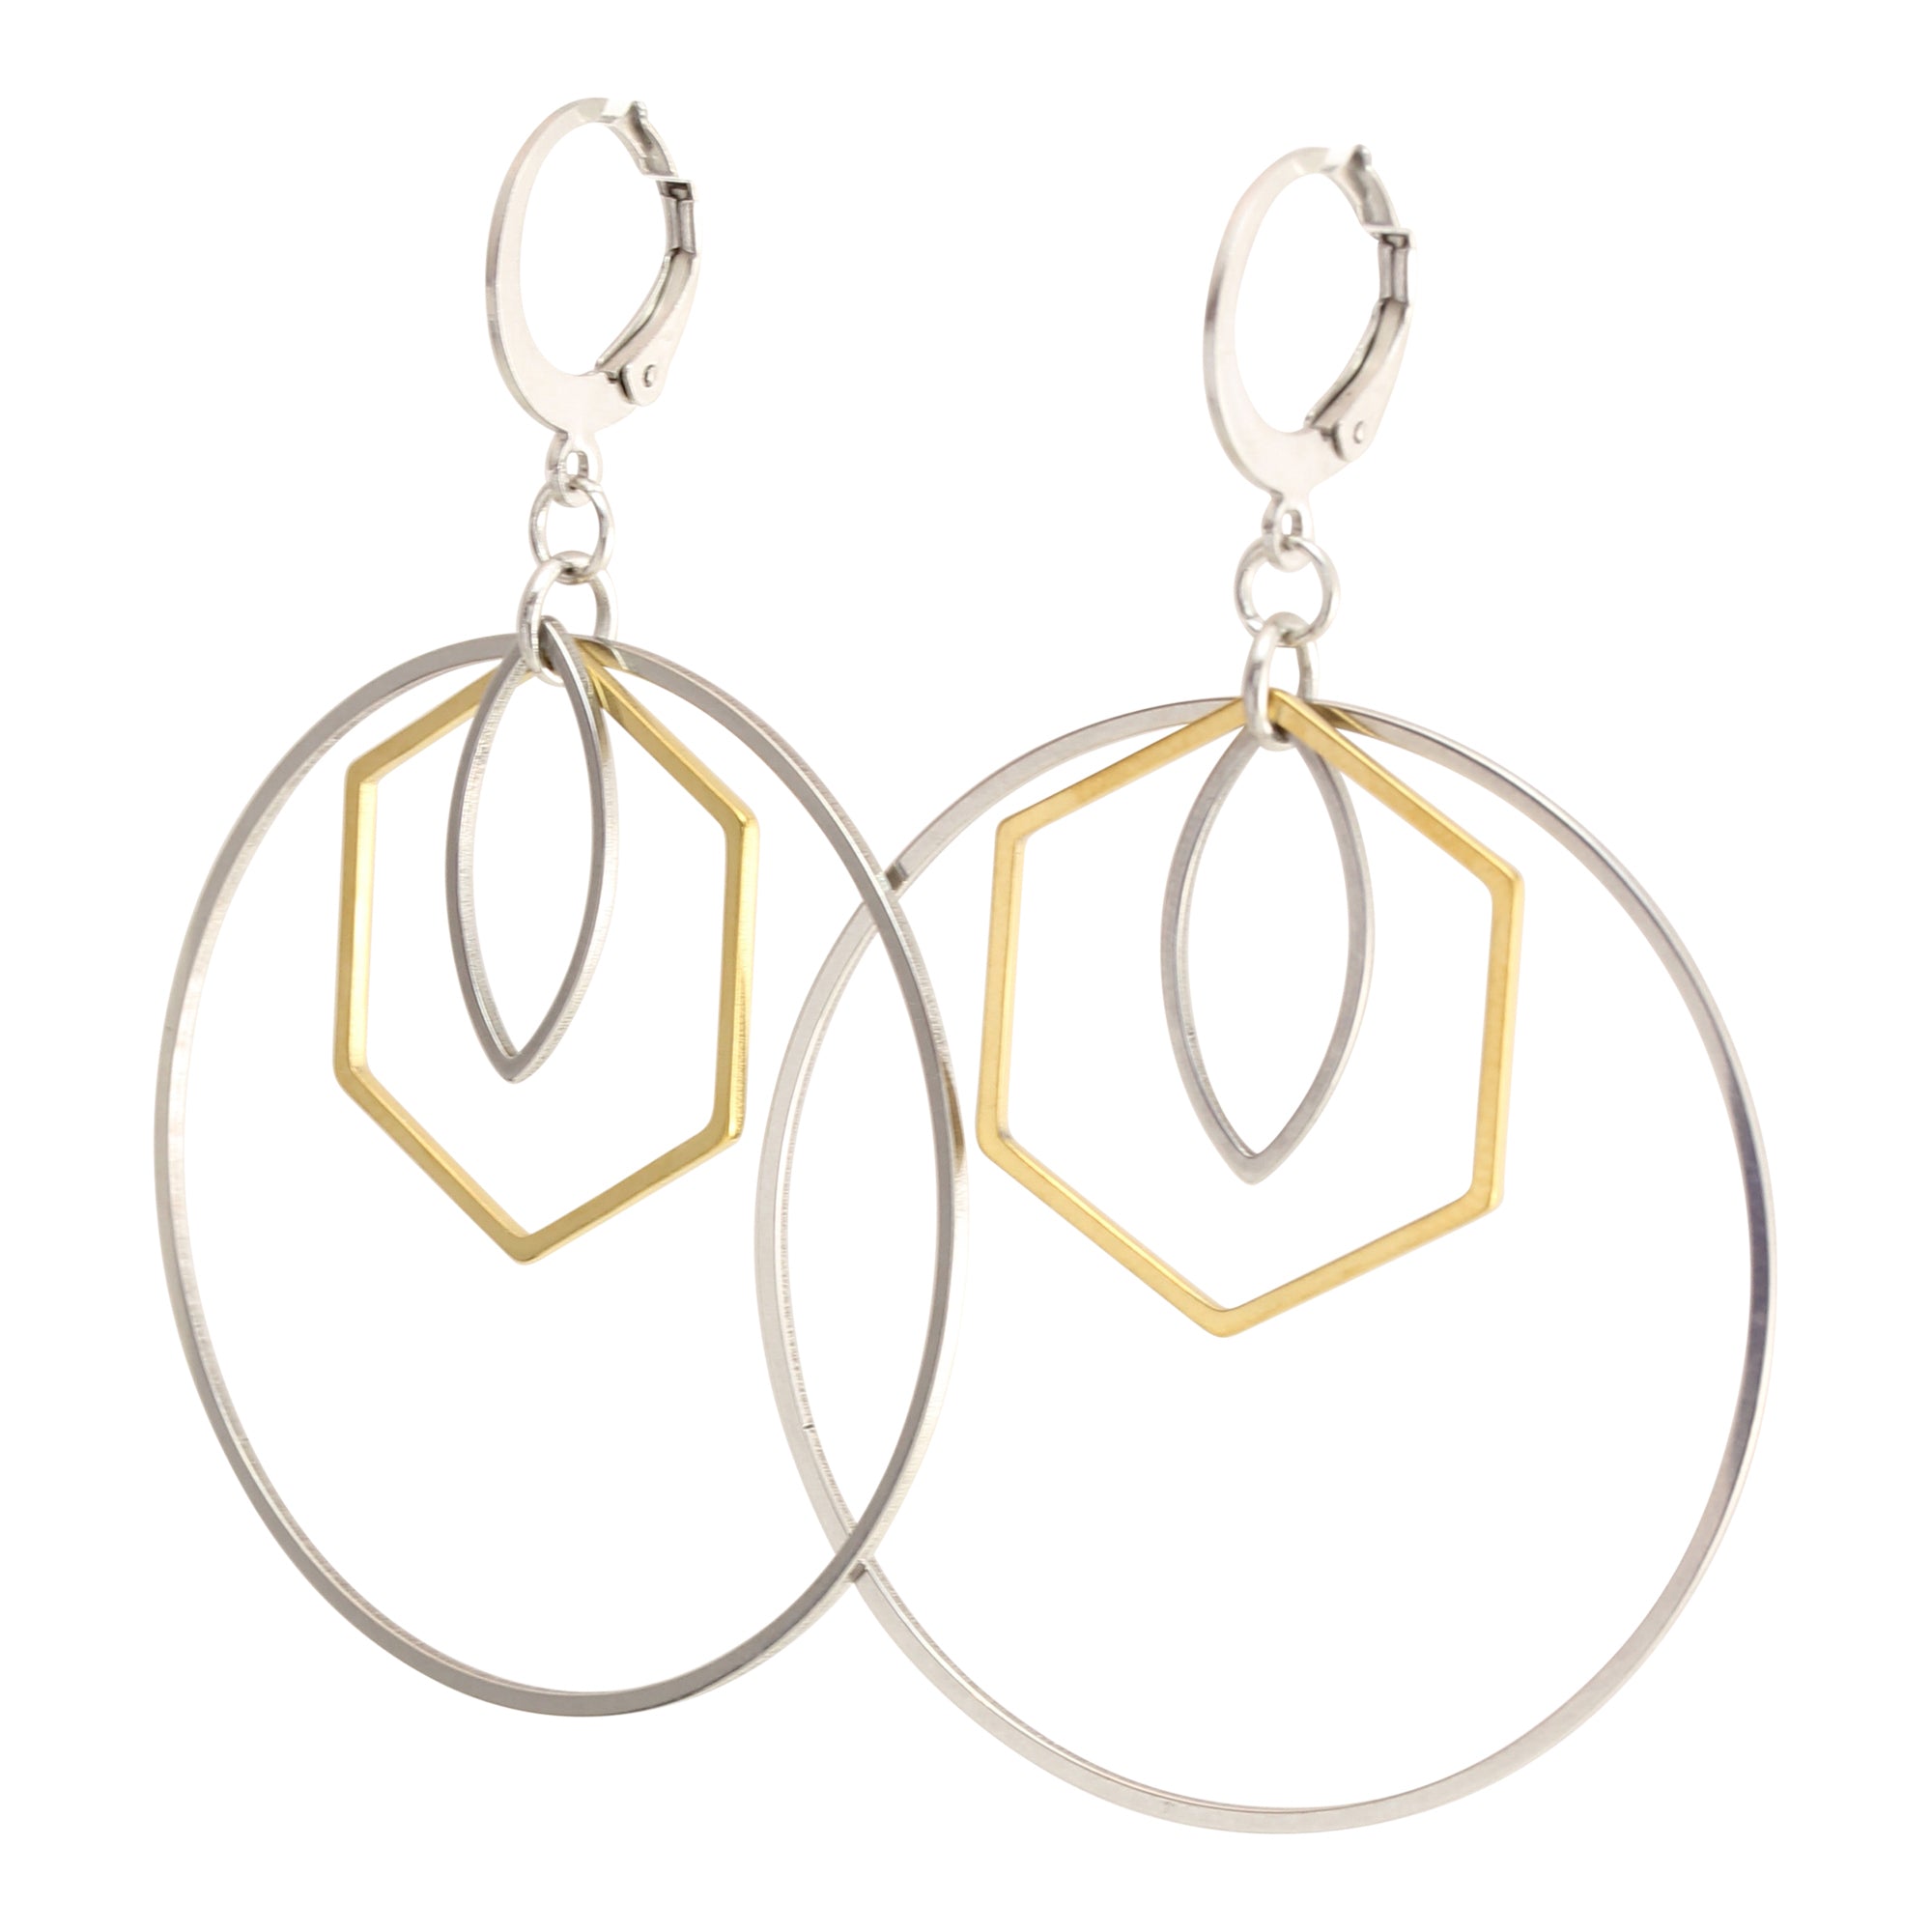 Waterproof "Imperméable” Medium Luxe Hoops in Silver and Gold